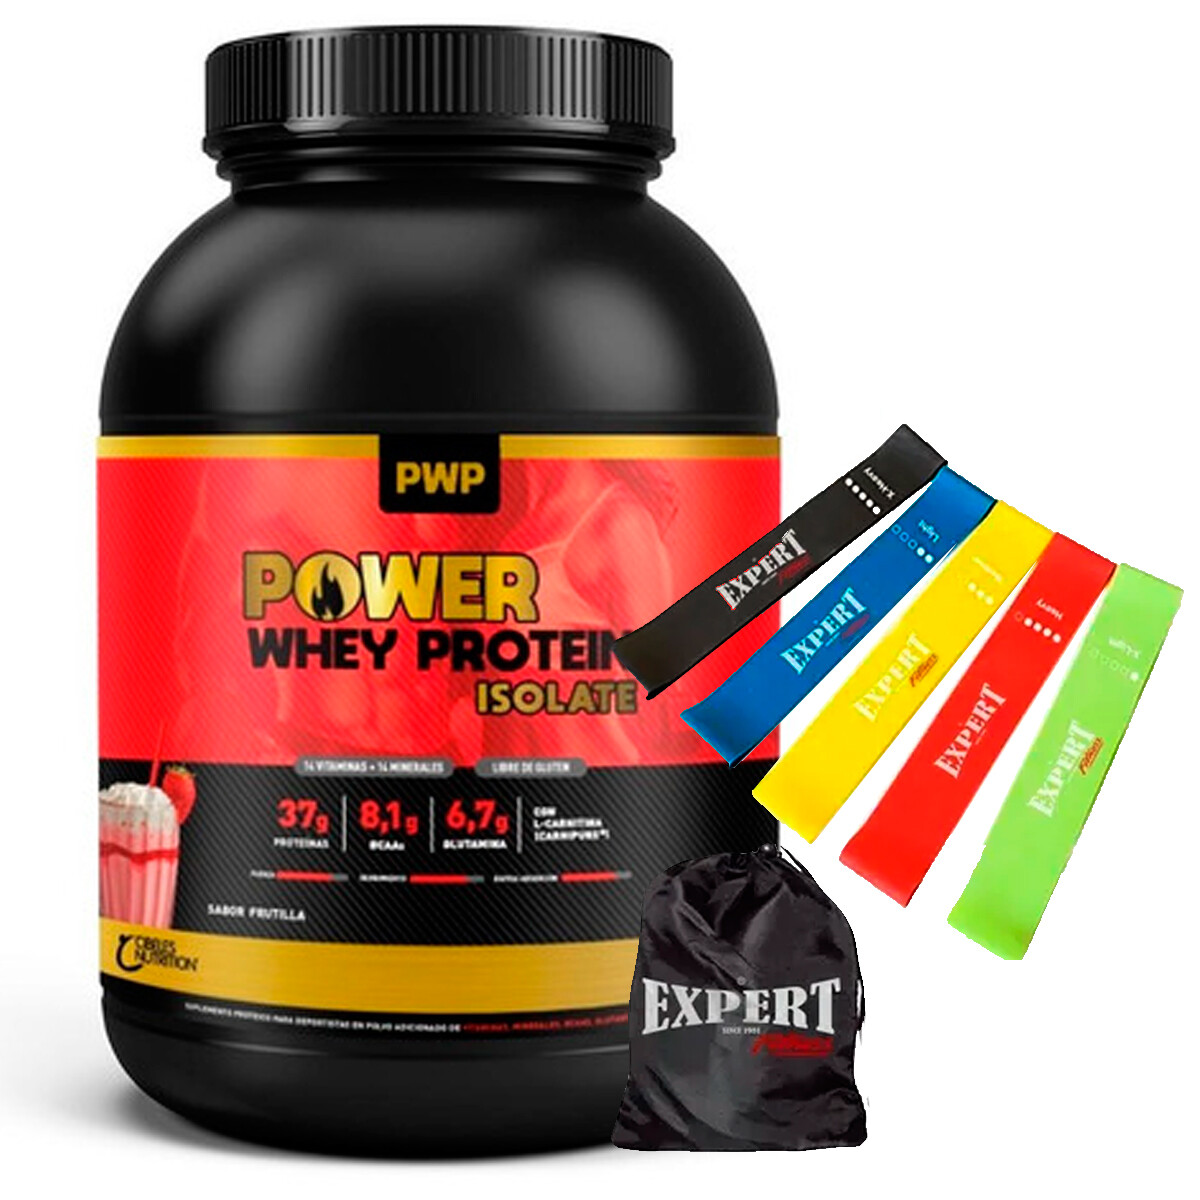 Suplemento Pwp Whey Protein Isolate 908g + Theraband 